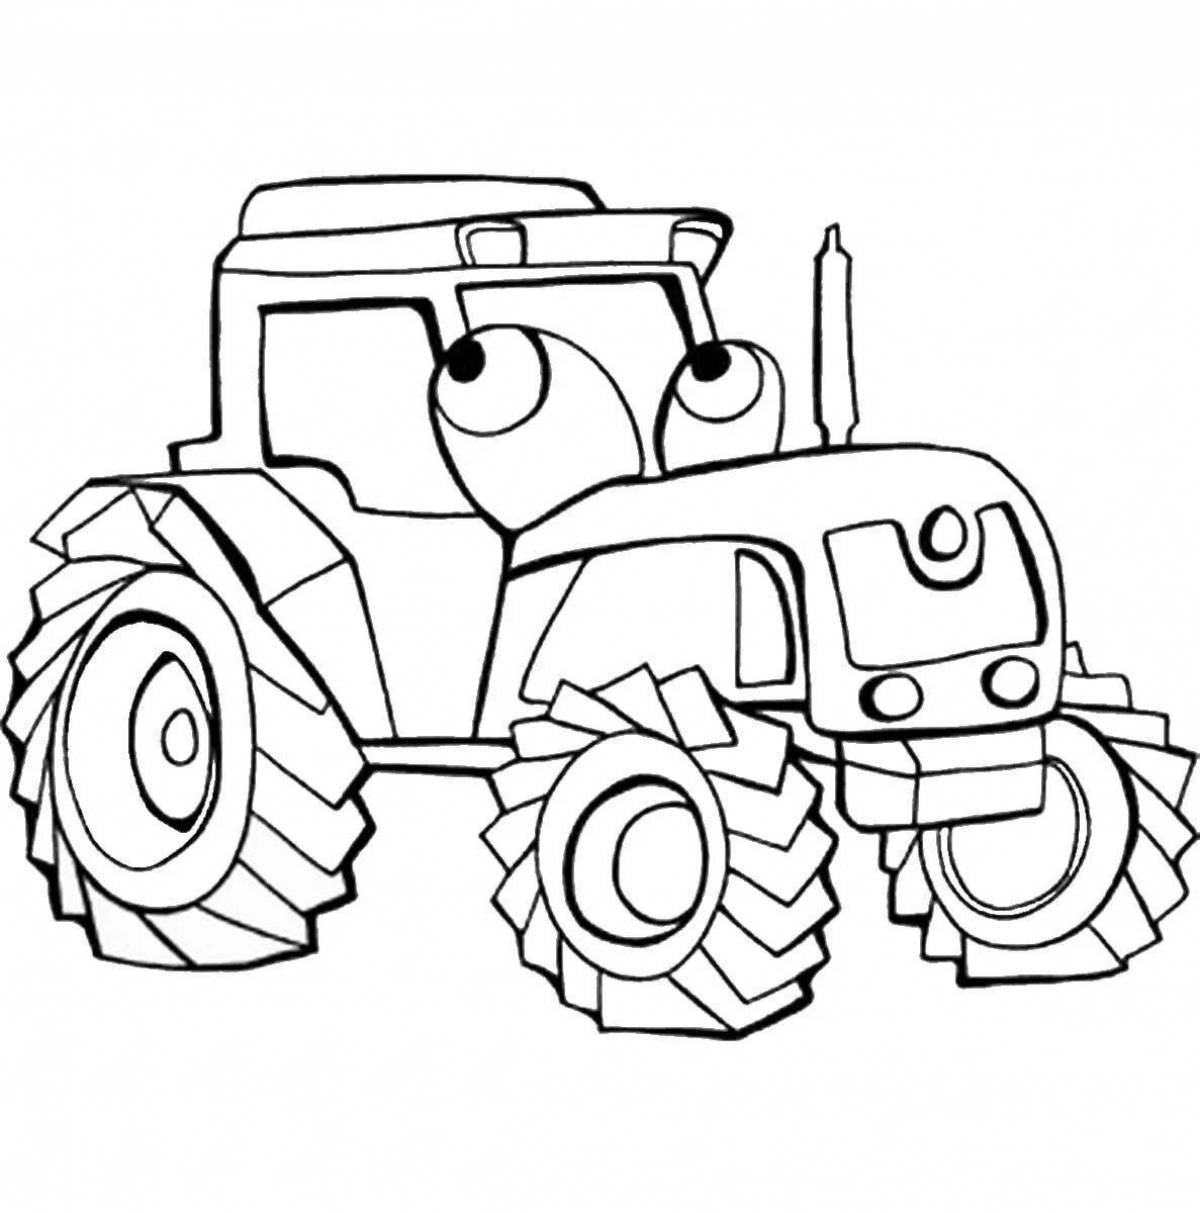 Tractor car coloring page